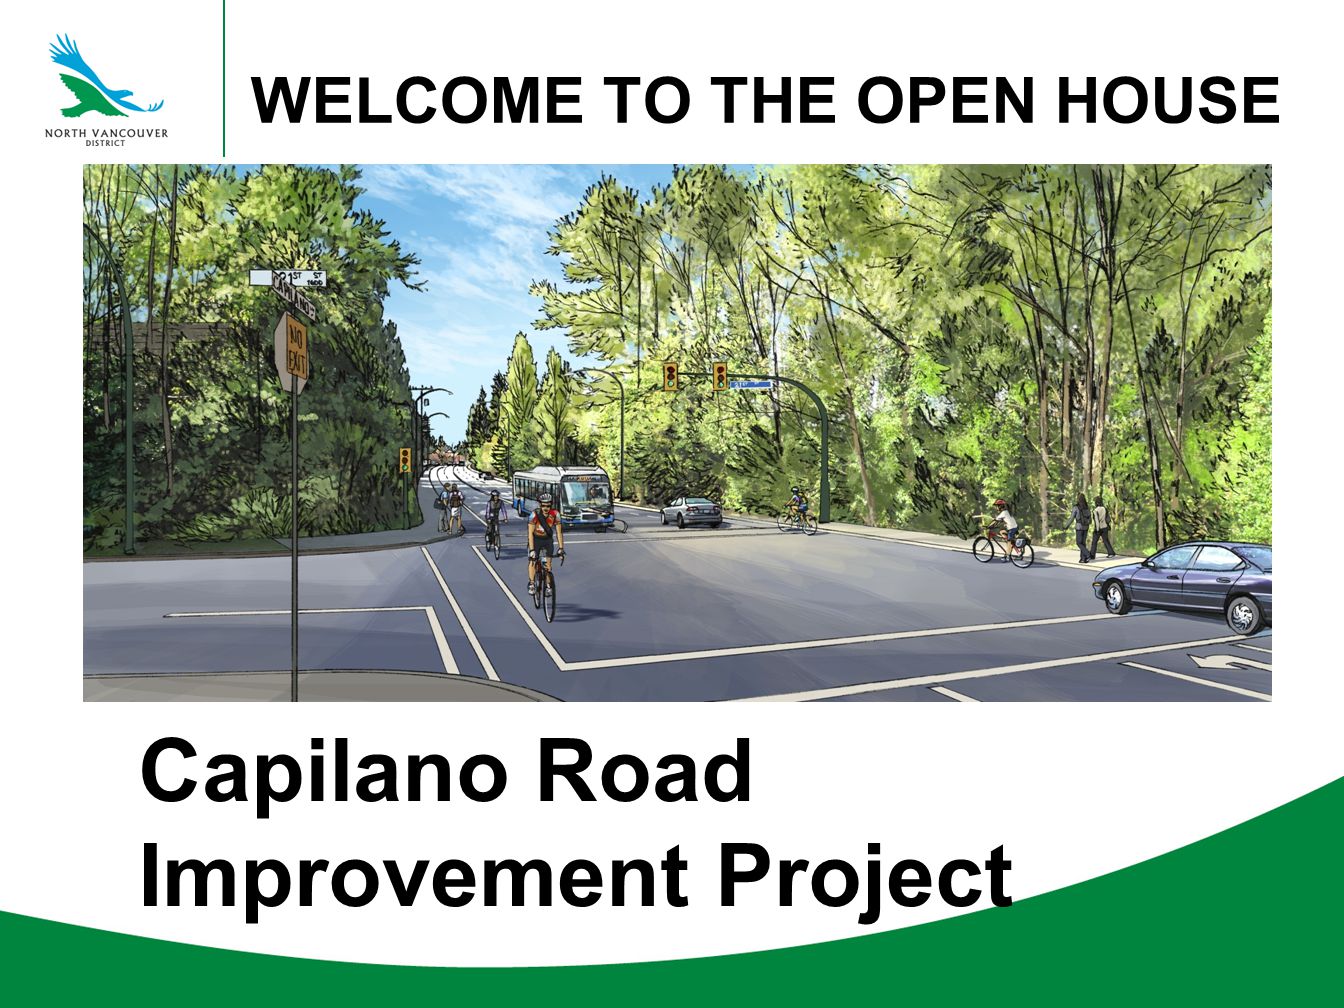 Capilano Road Improvement Project WELCOME TO THE OPEN HOUSE